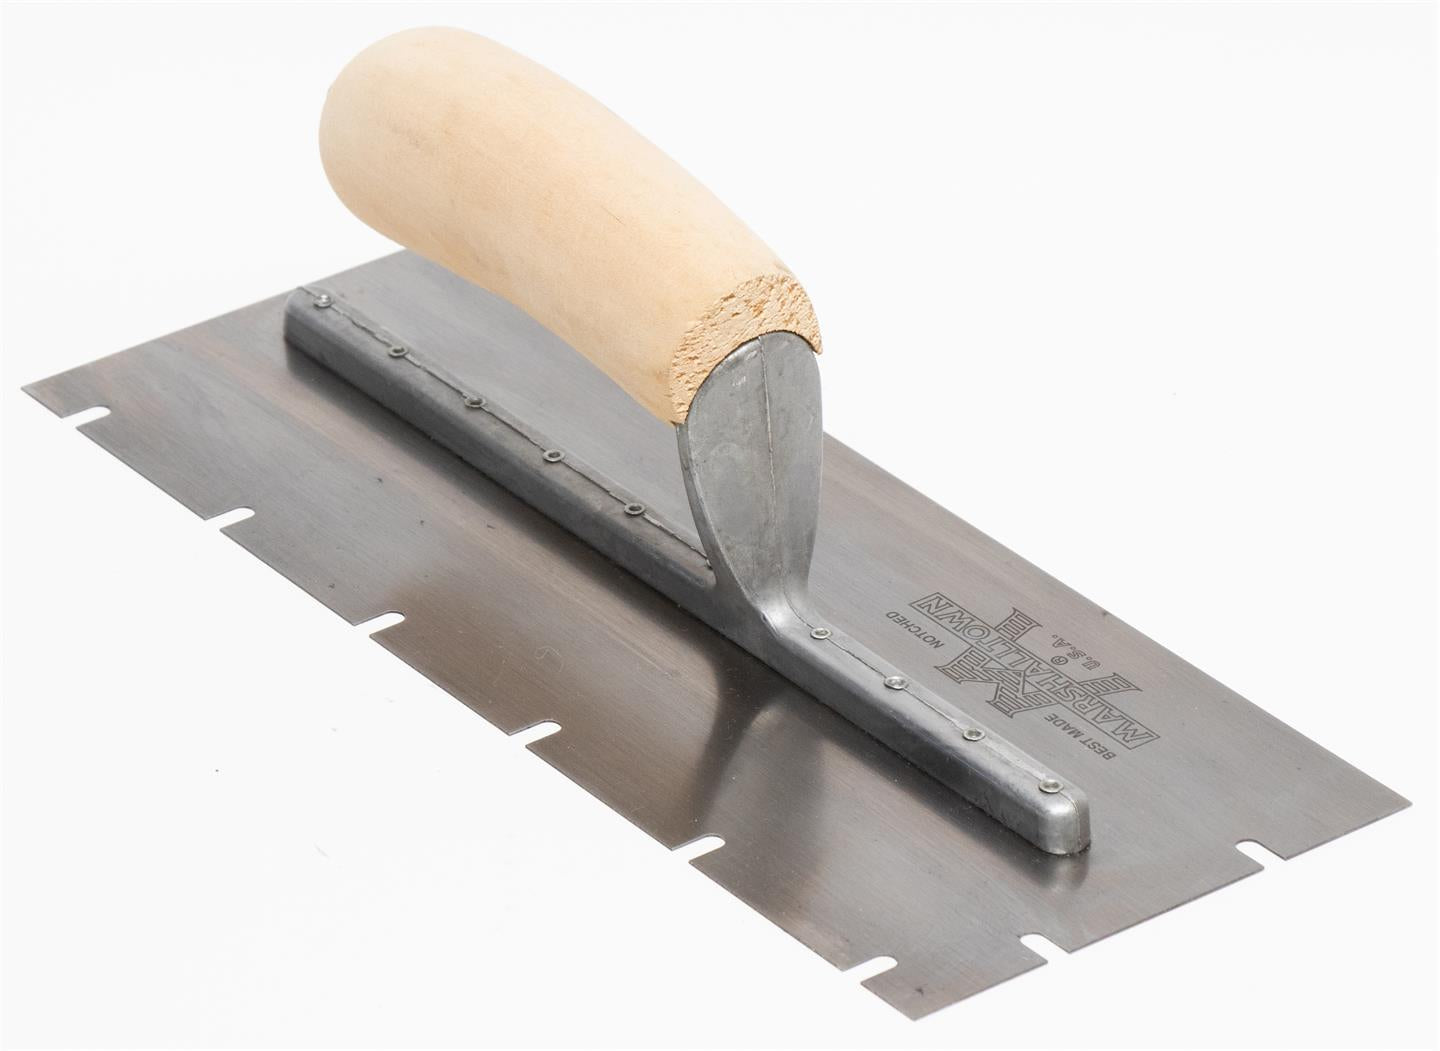 Marshalltown 10711 11 X 4 1-2 Stainless Steel Notched Trowel;3-16 X 3-8 X 1 3-4 Wood Handle